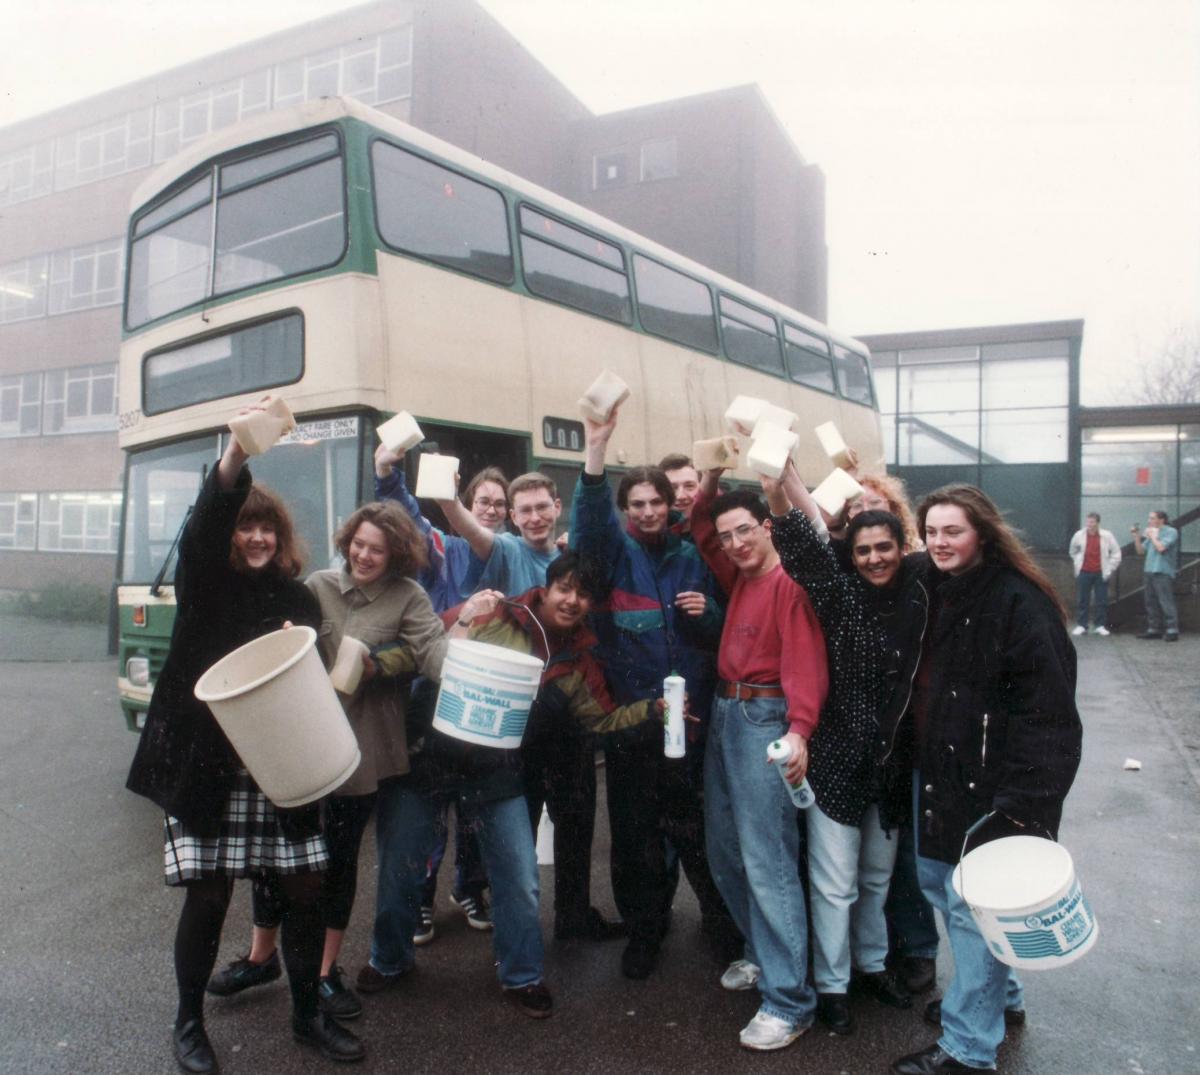 Collecting for charity in 1993